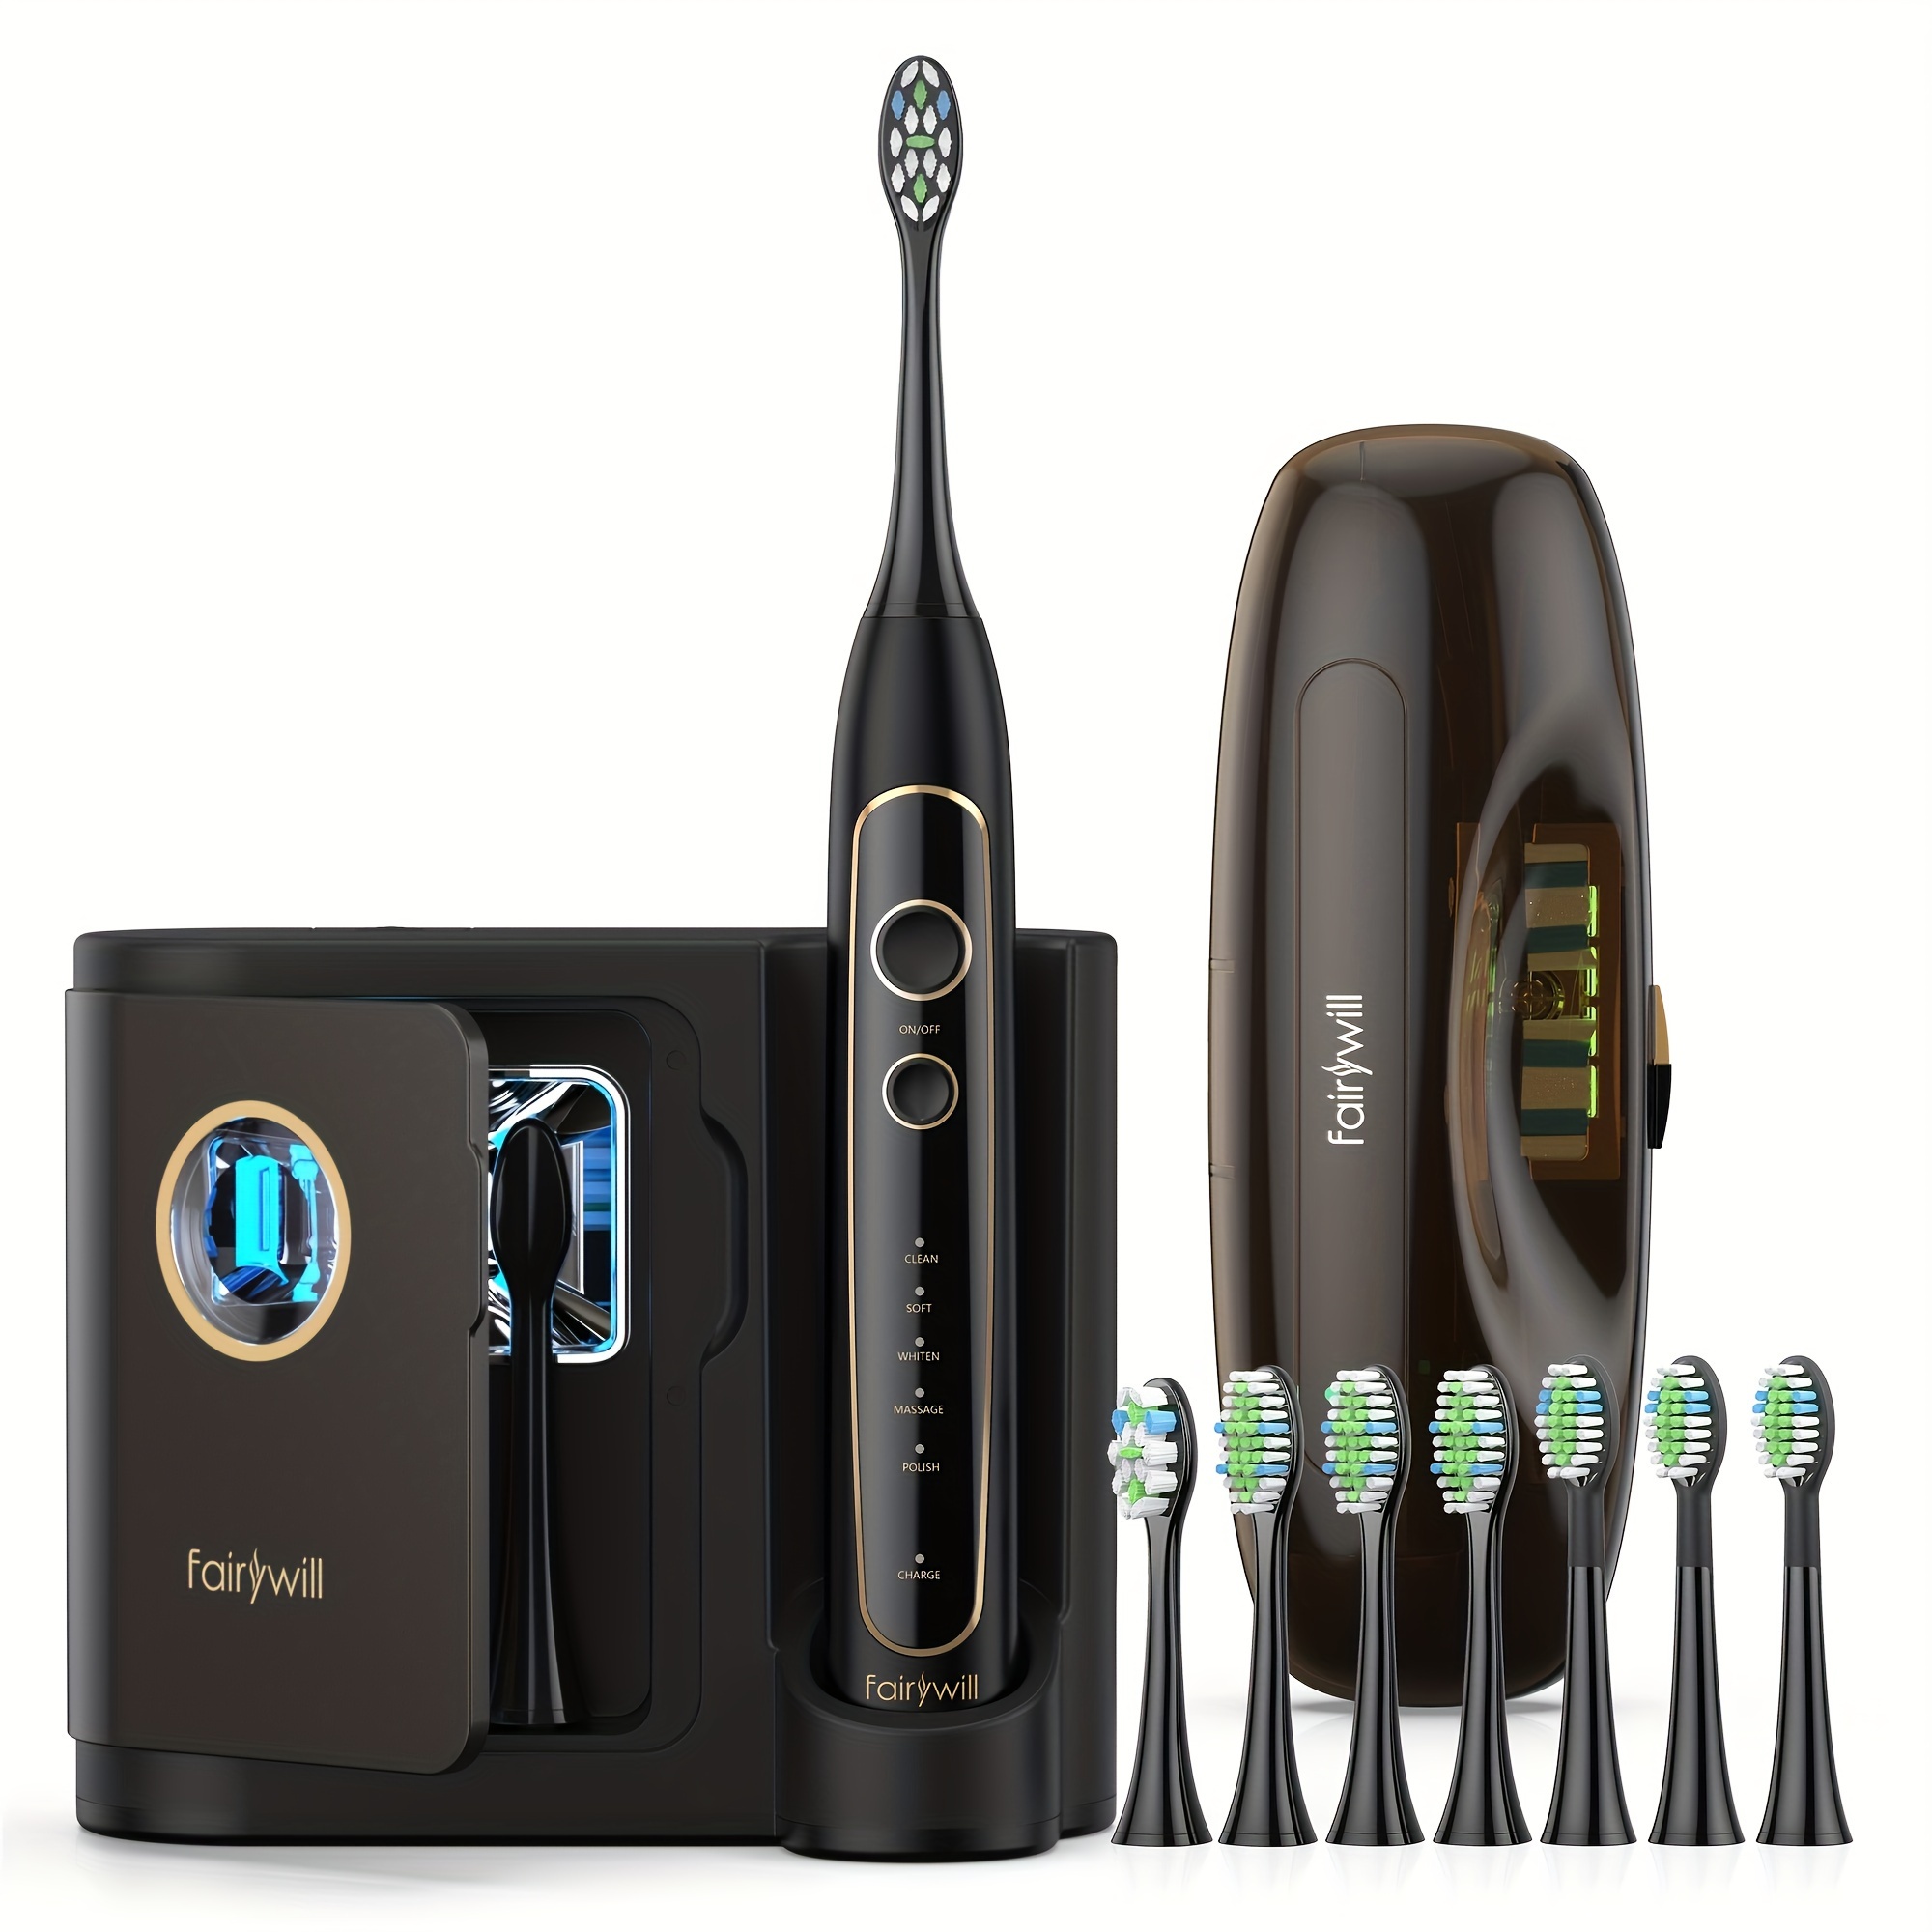 

Fairywill Electric Toothbrush With Uv Sanitizer, Ultra- Power Whitening Toothbrush With 5 Modes, Wireless Charging And Smart Timer, 8 Brush Heads With A Chargeable Travel Case